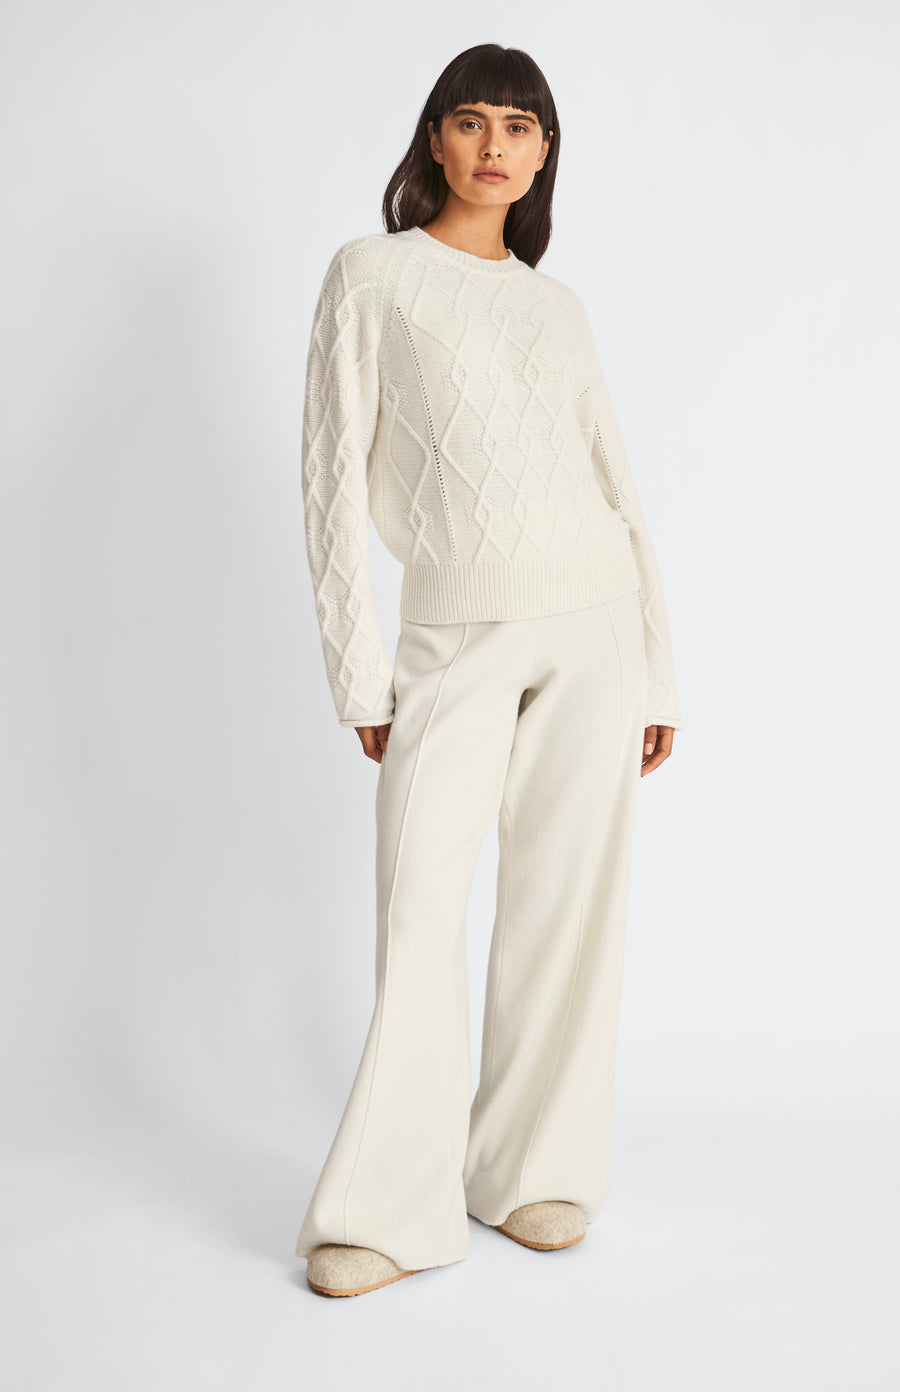 Pringle Round Neck Multi Textured Cashmere Blend Jumper in Cream with matching trousers